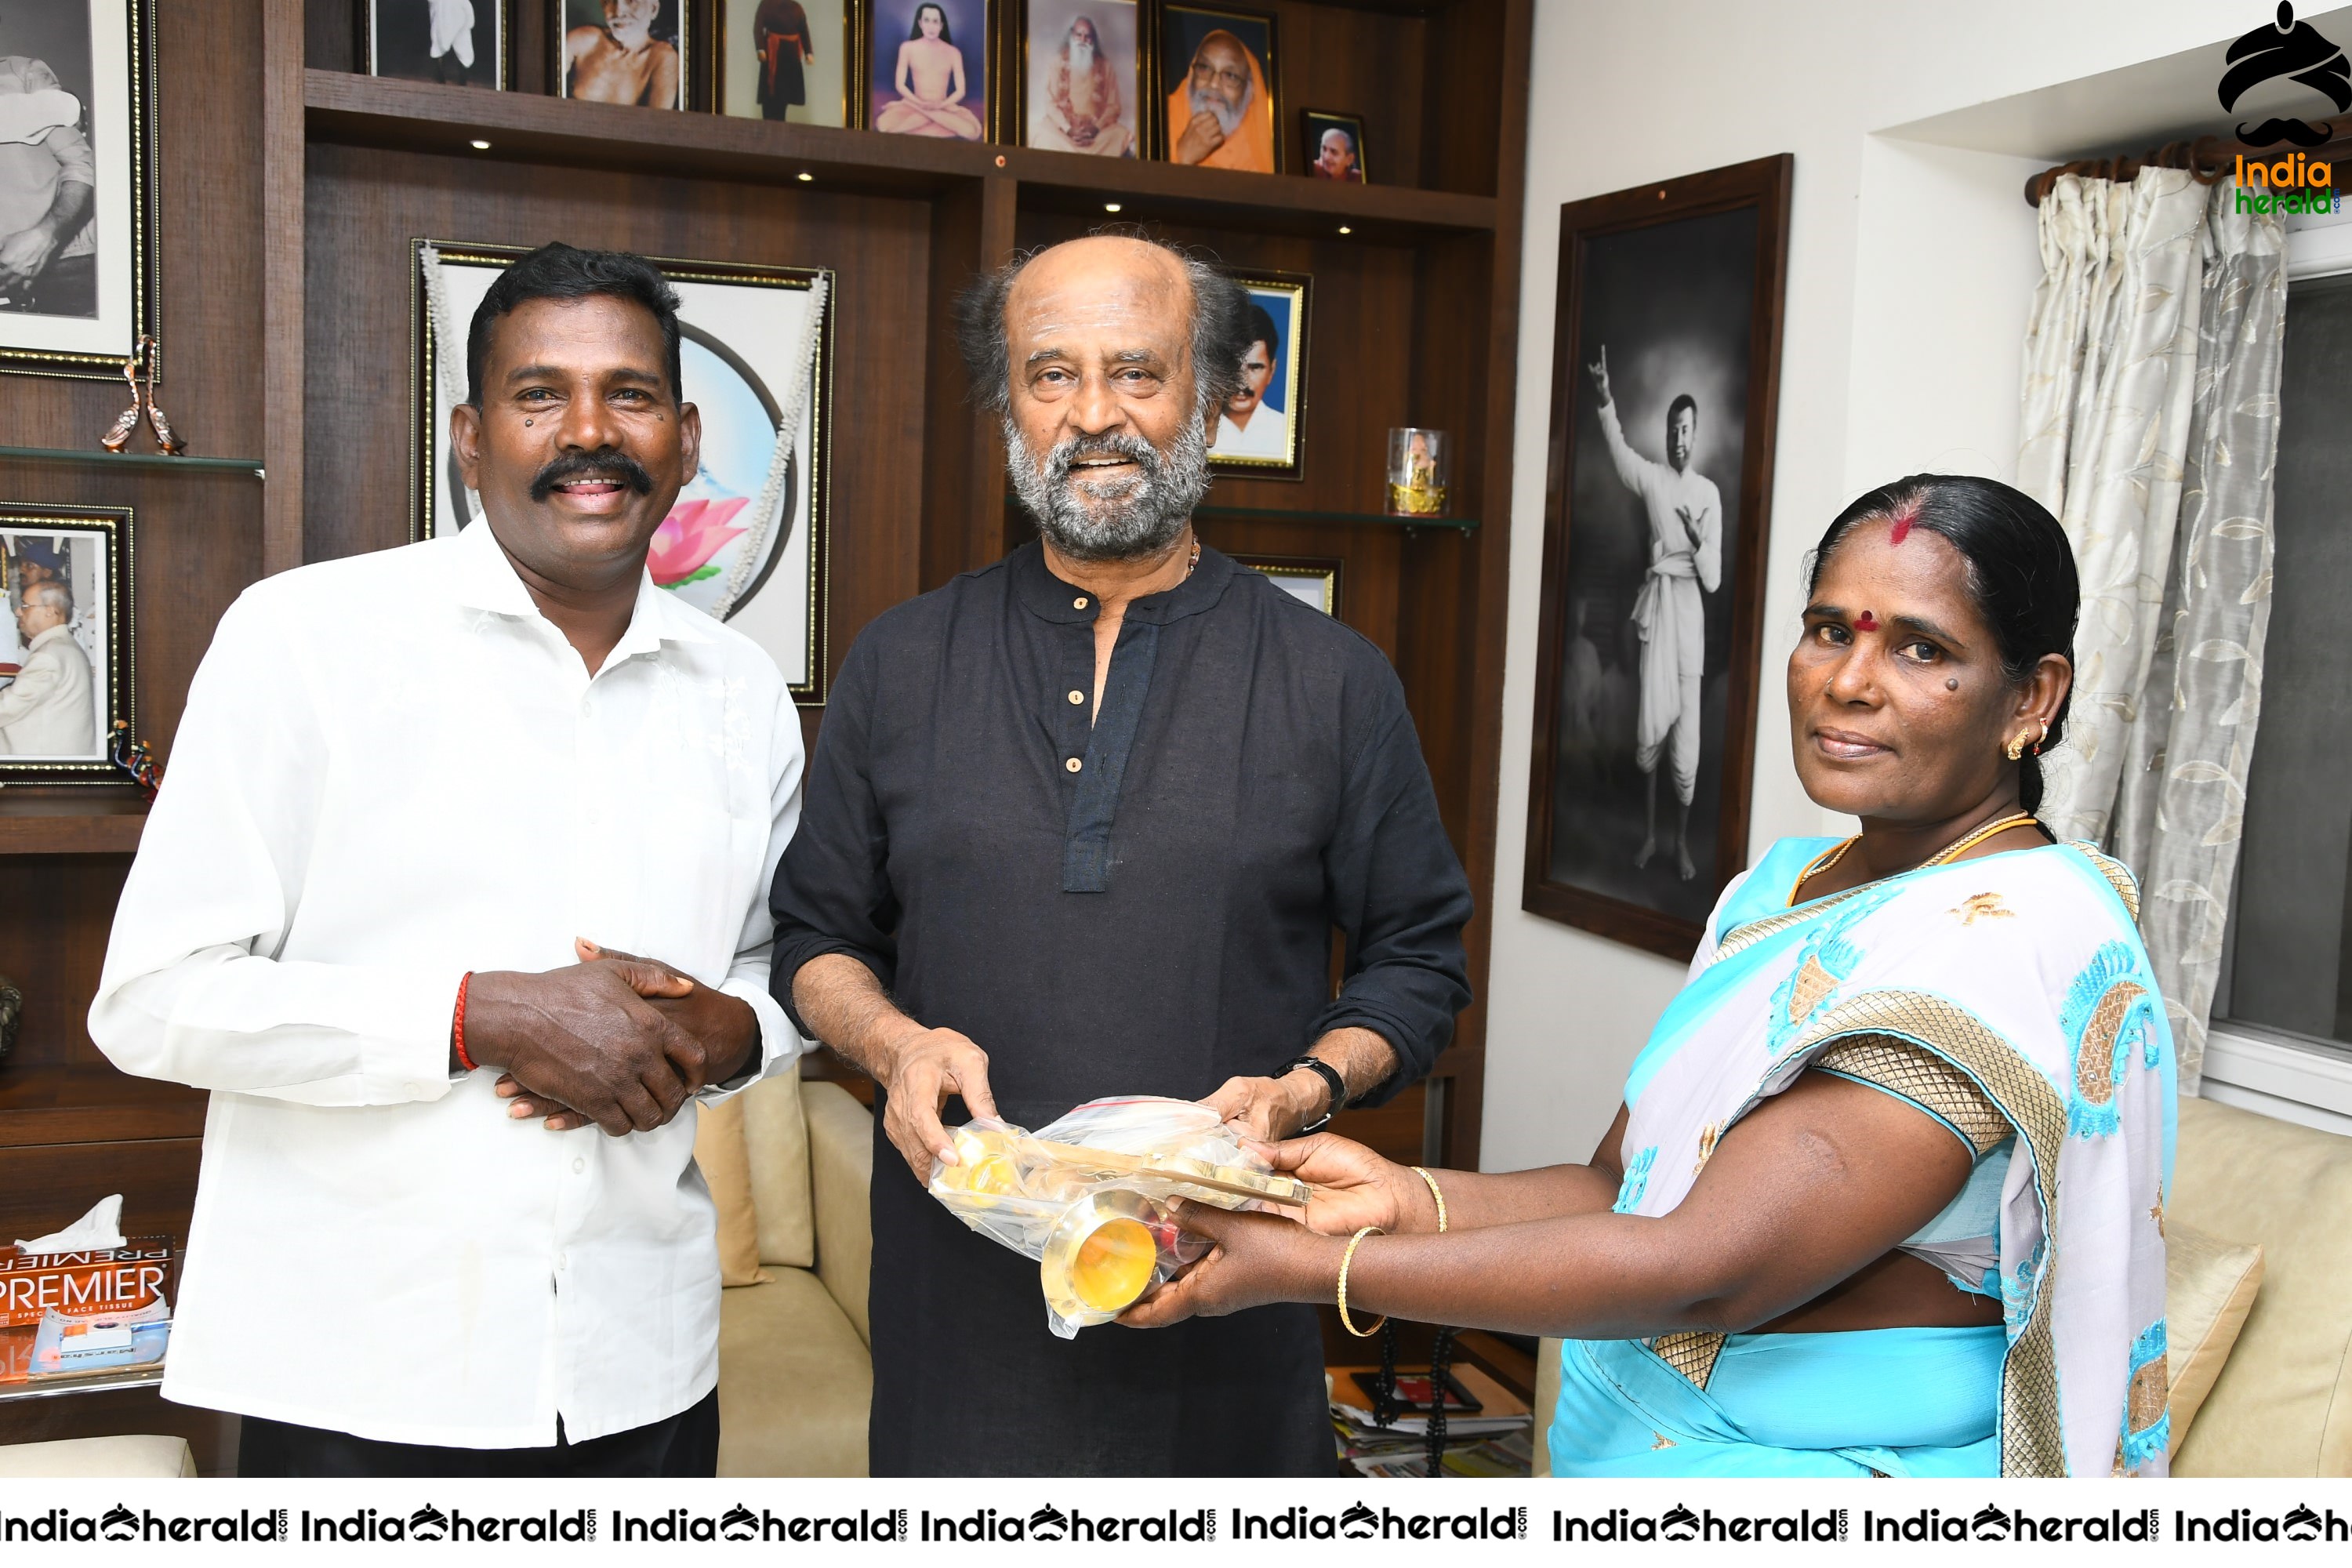 Super Star Rajini distribute Free Homes to the people who lost everything in Gaja Cyclone Set 2